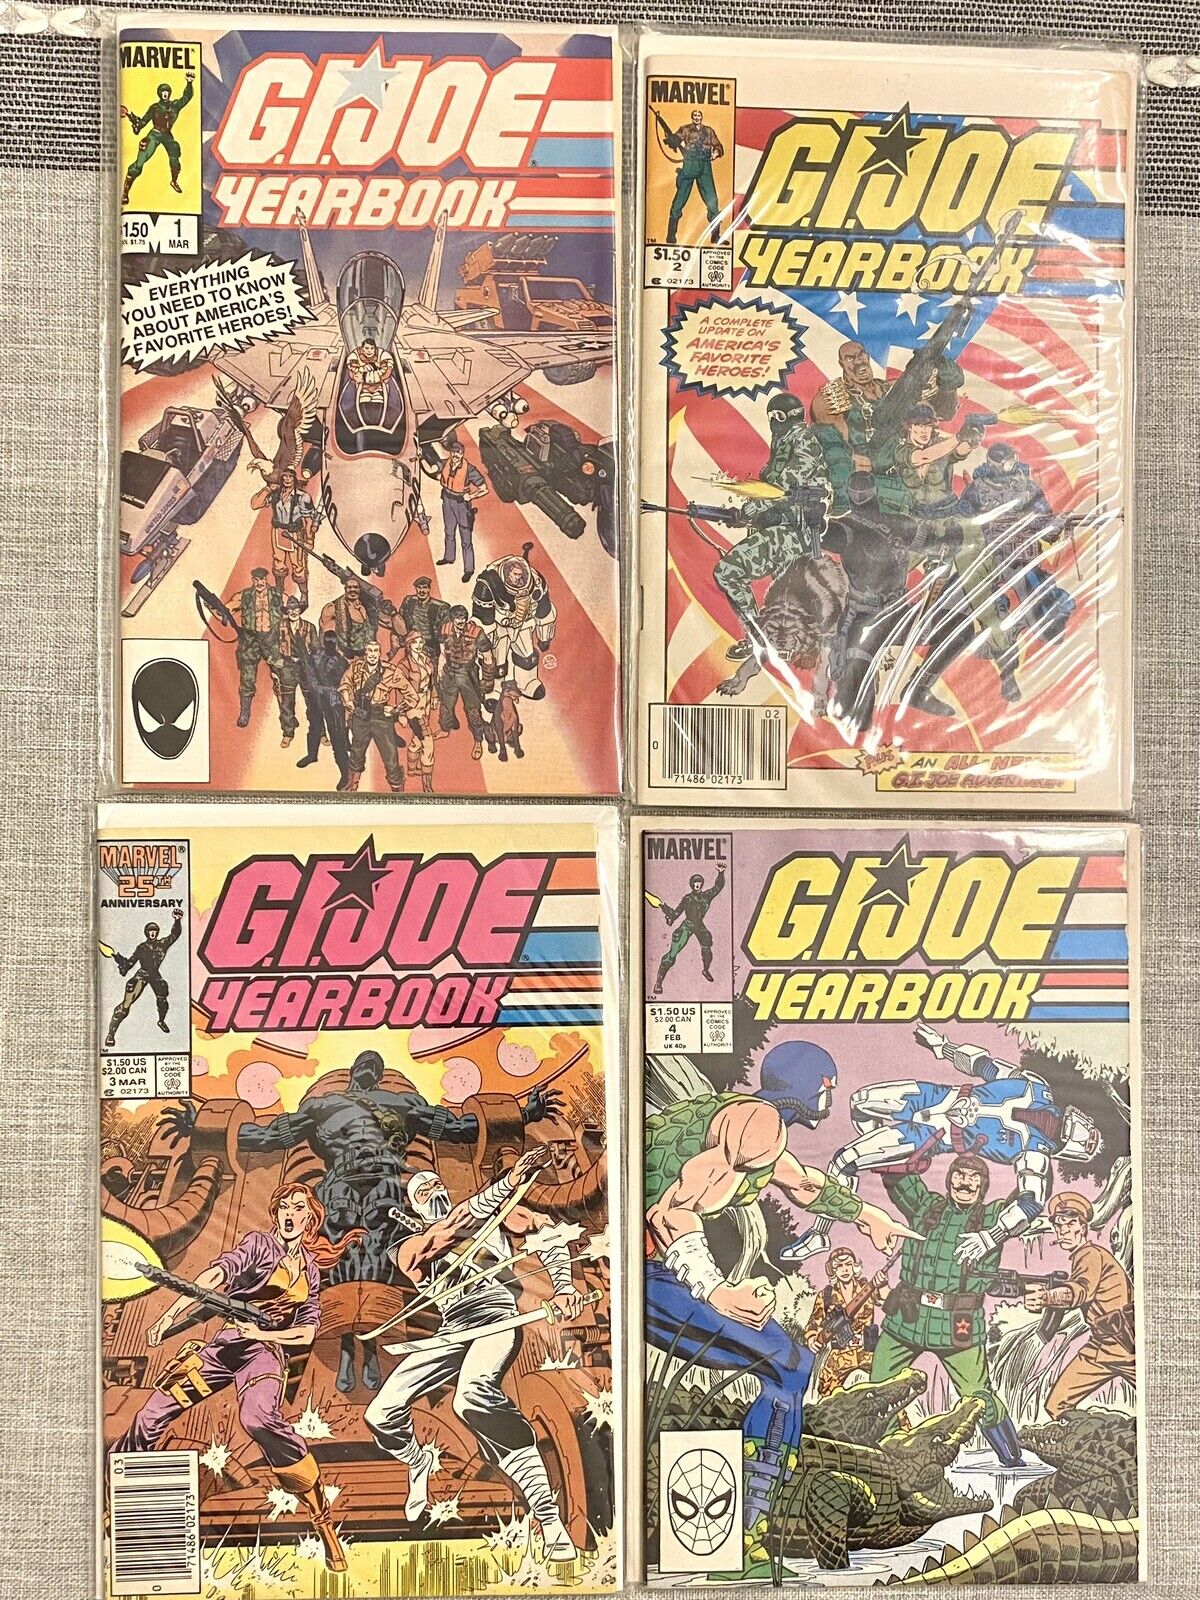 GI Joe YEARBOOK # 1 2 3 4 (1985) Complete Set Giant-Sized Issues